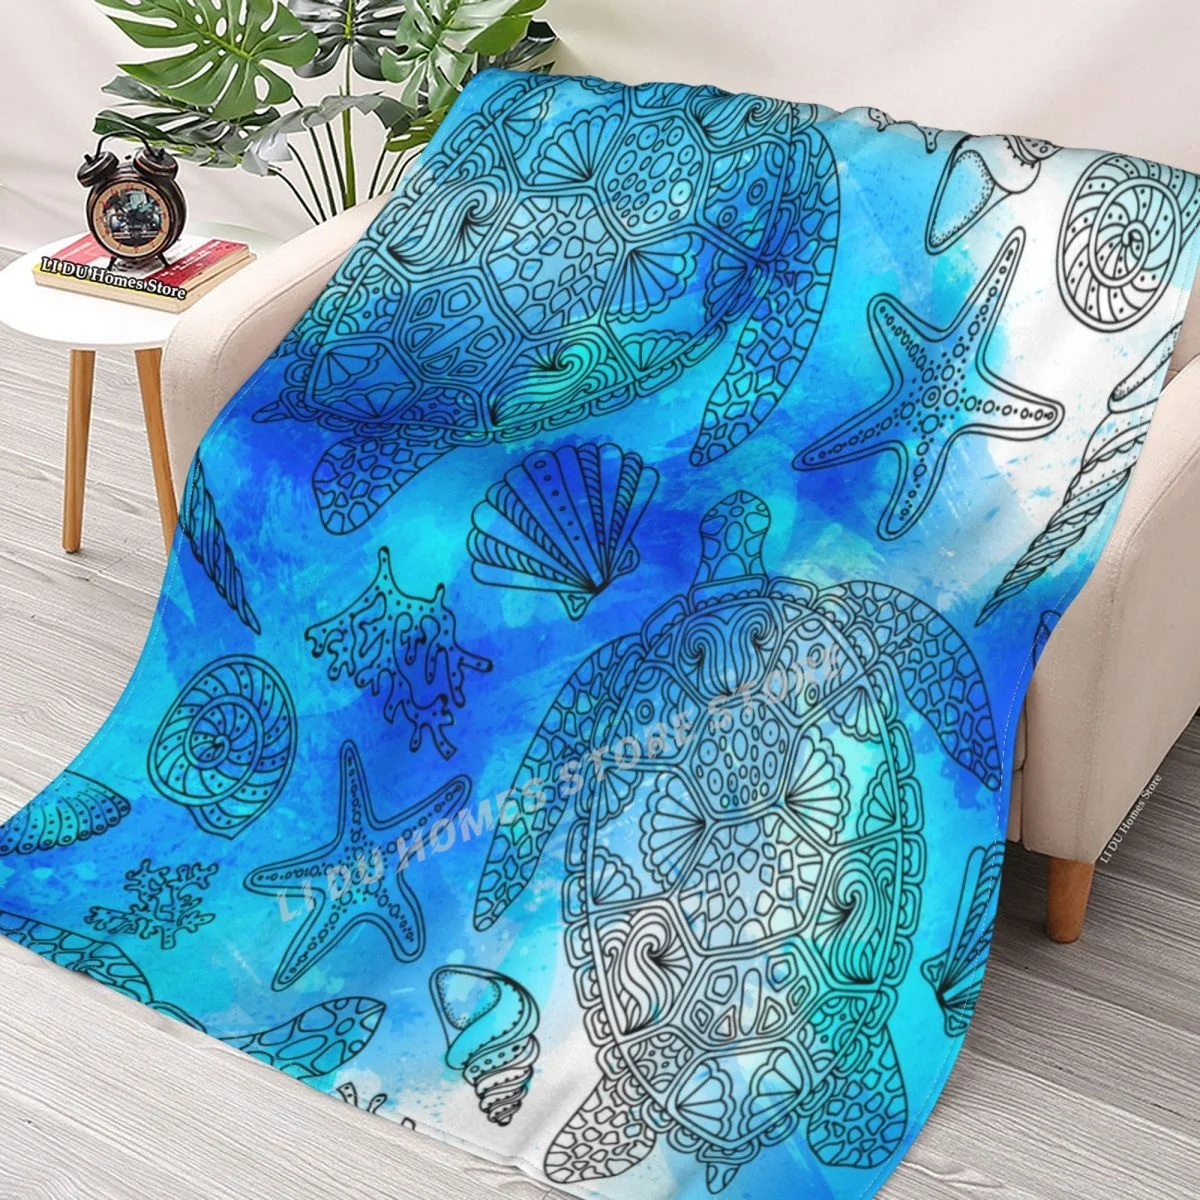 

Various Shell, Algae, Starfish, Coral Throw Blanket flannel Collage Blanket Bedding soft Cover Bedspreads Blankets